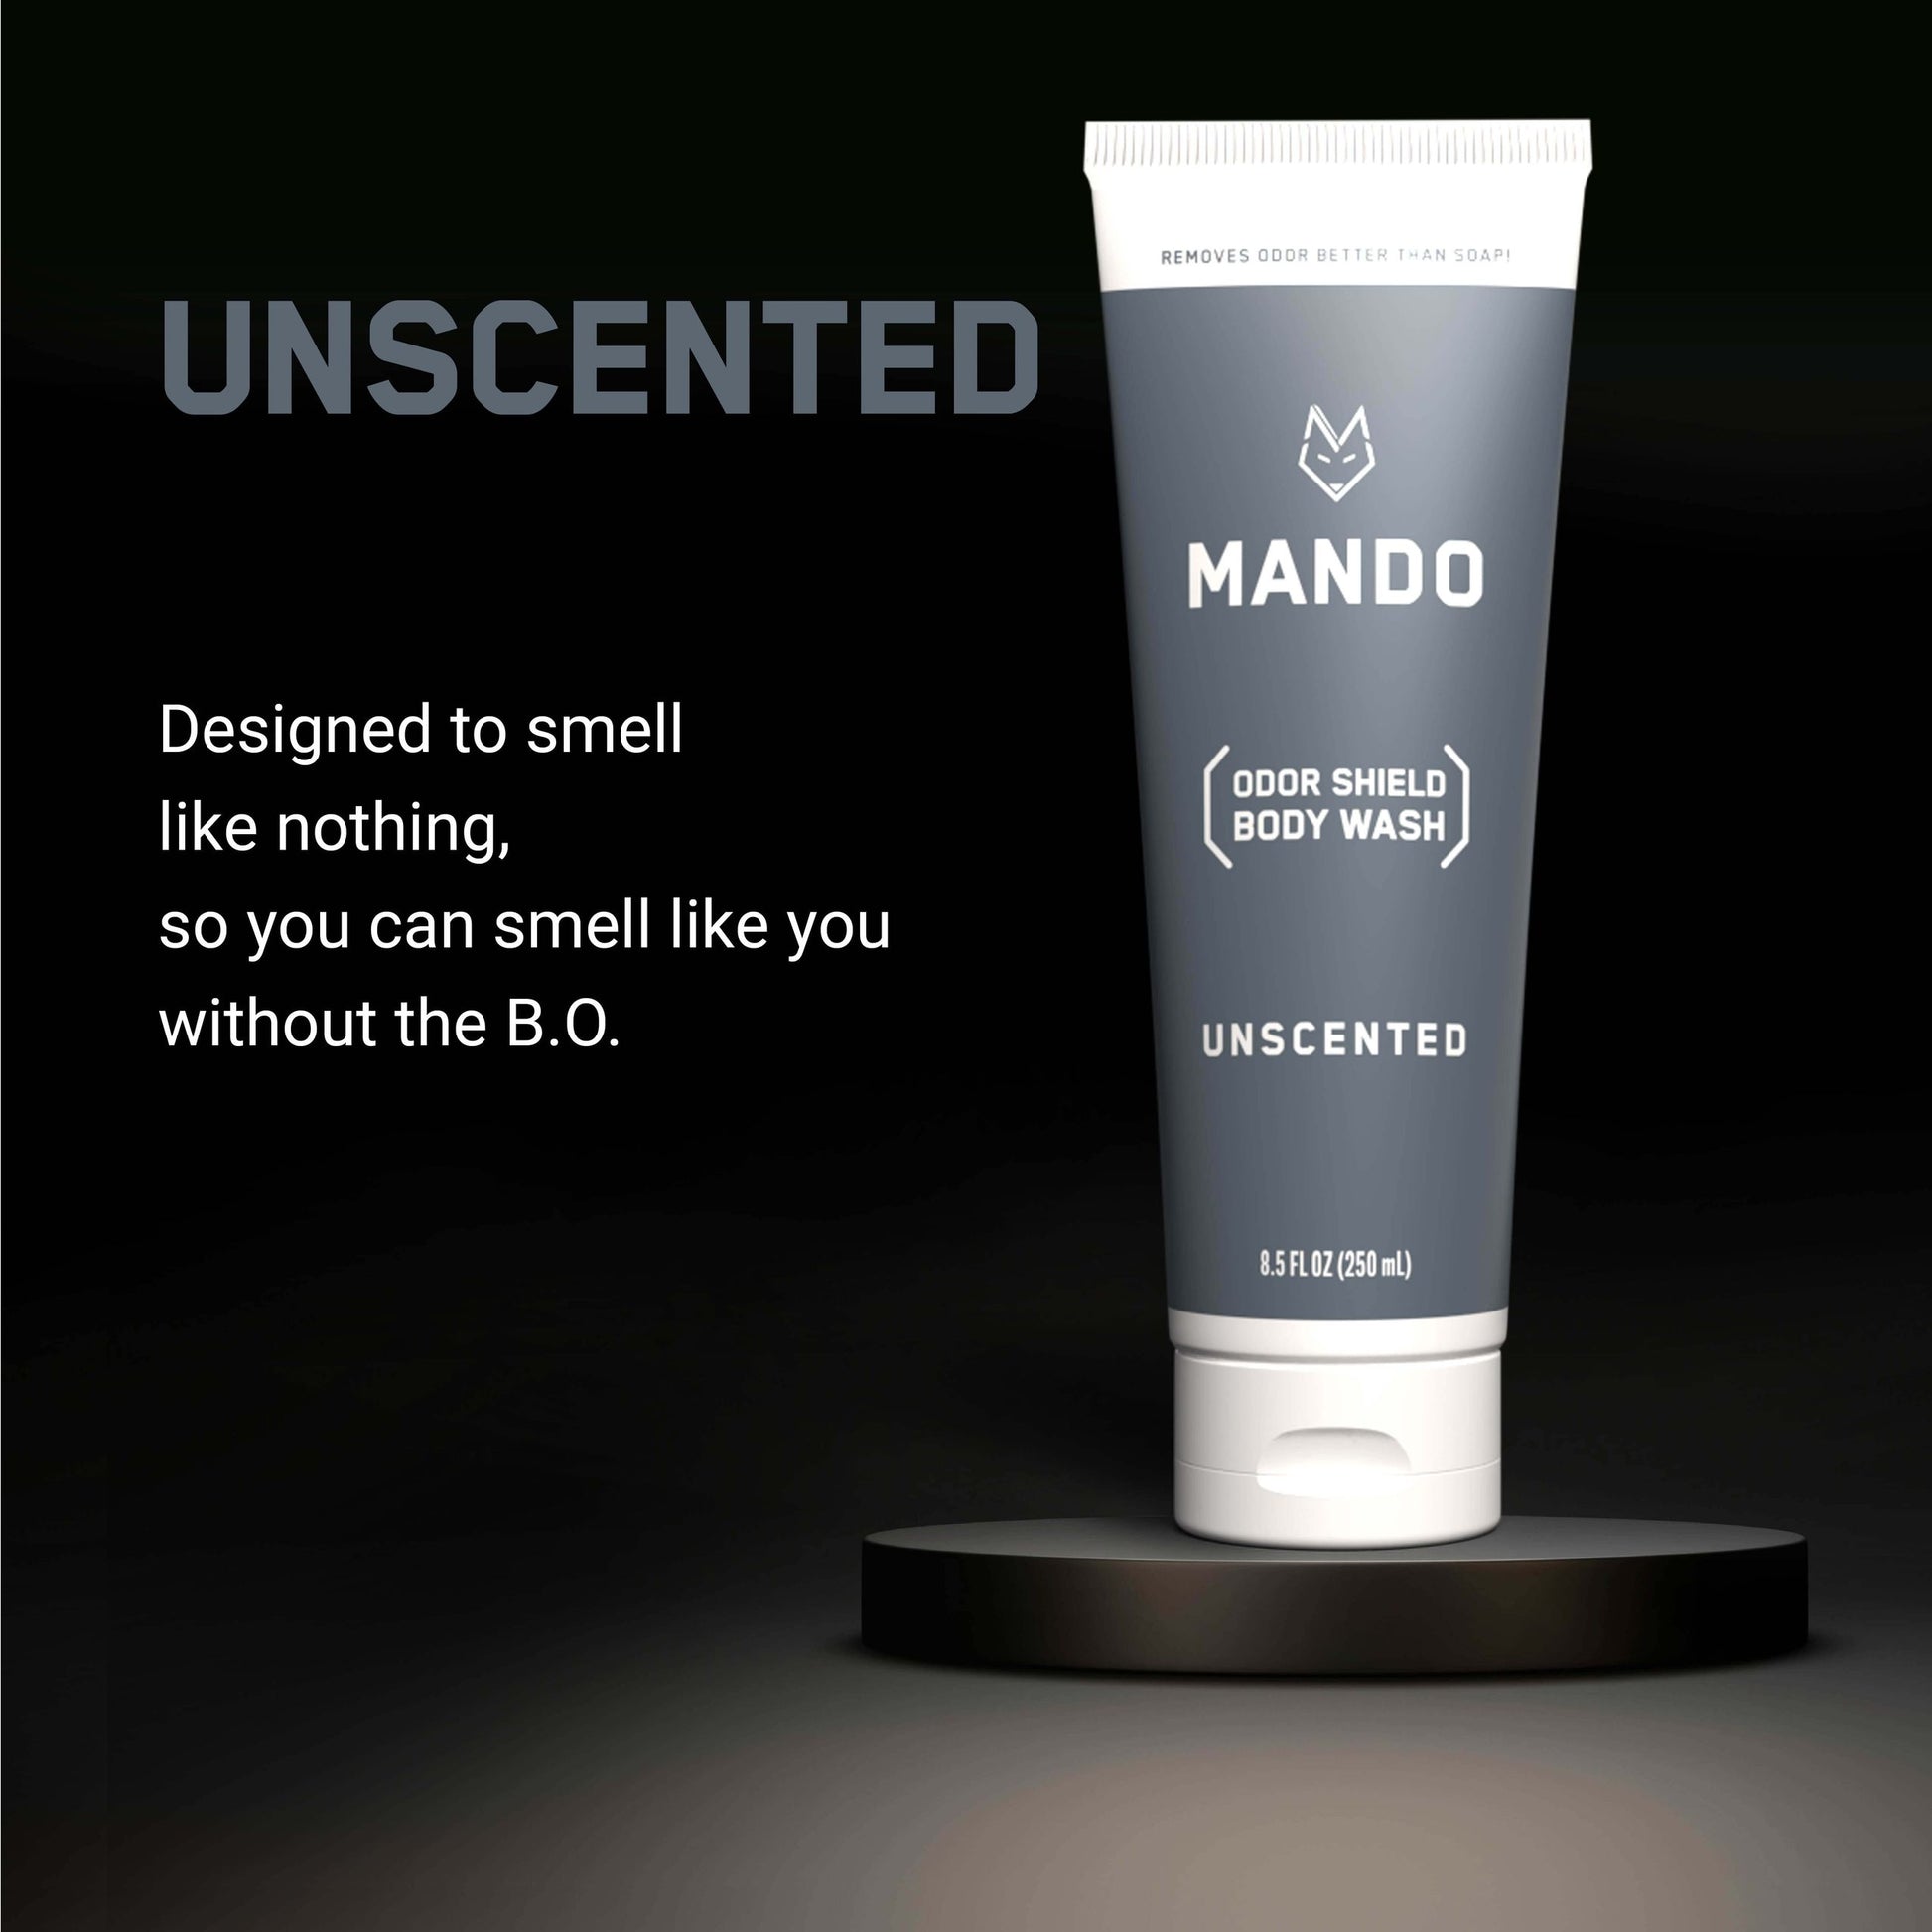 grey tube of Mando body wash in unscented scent with text: designed to smell like nothing, so you can smell like you without the B.O